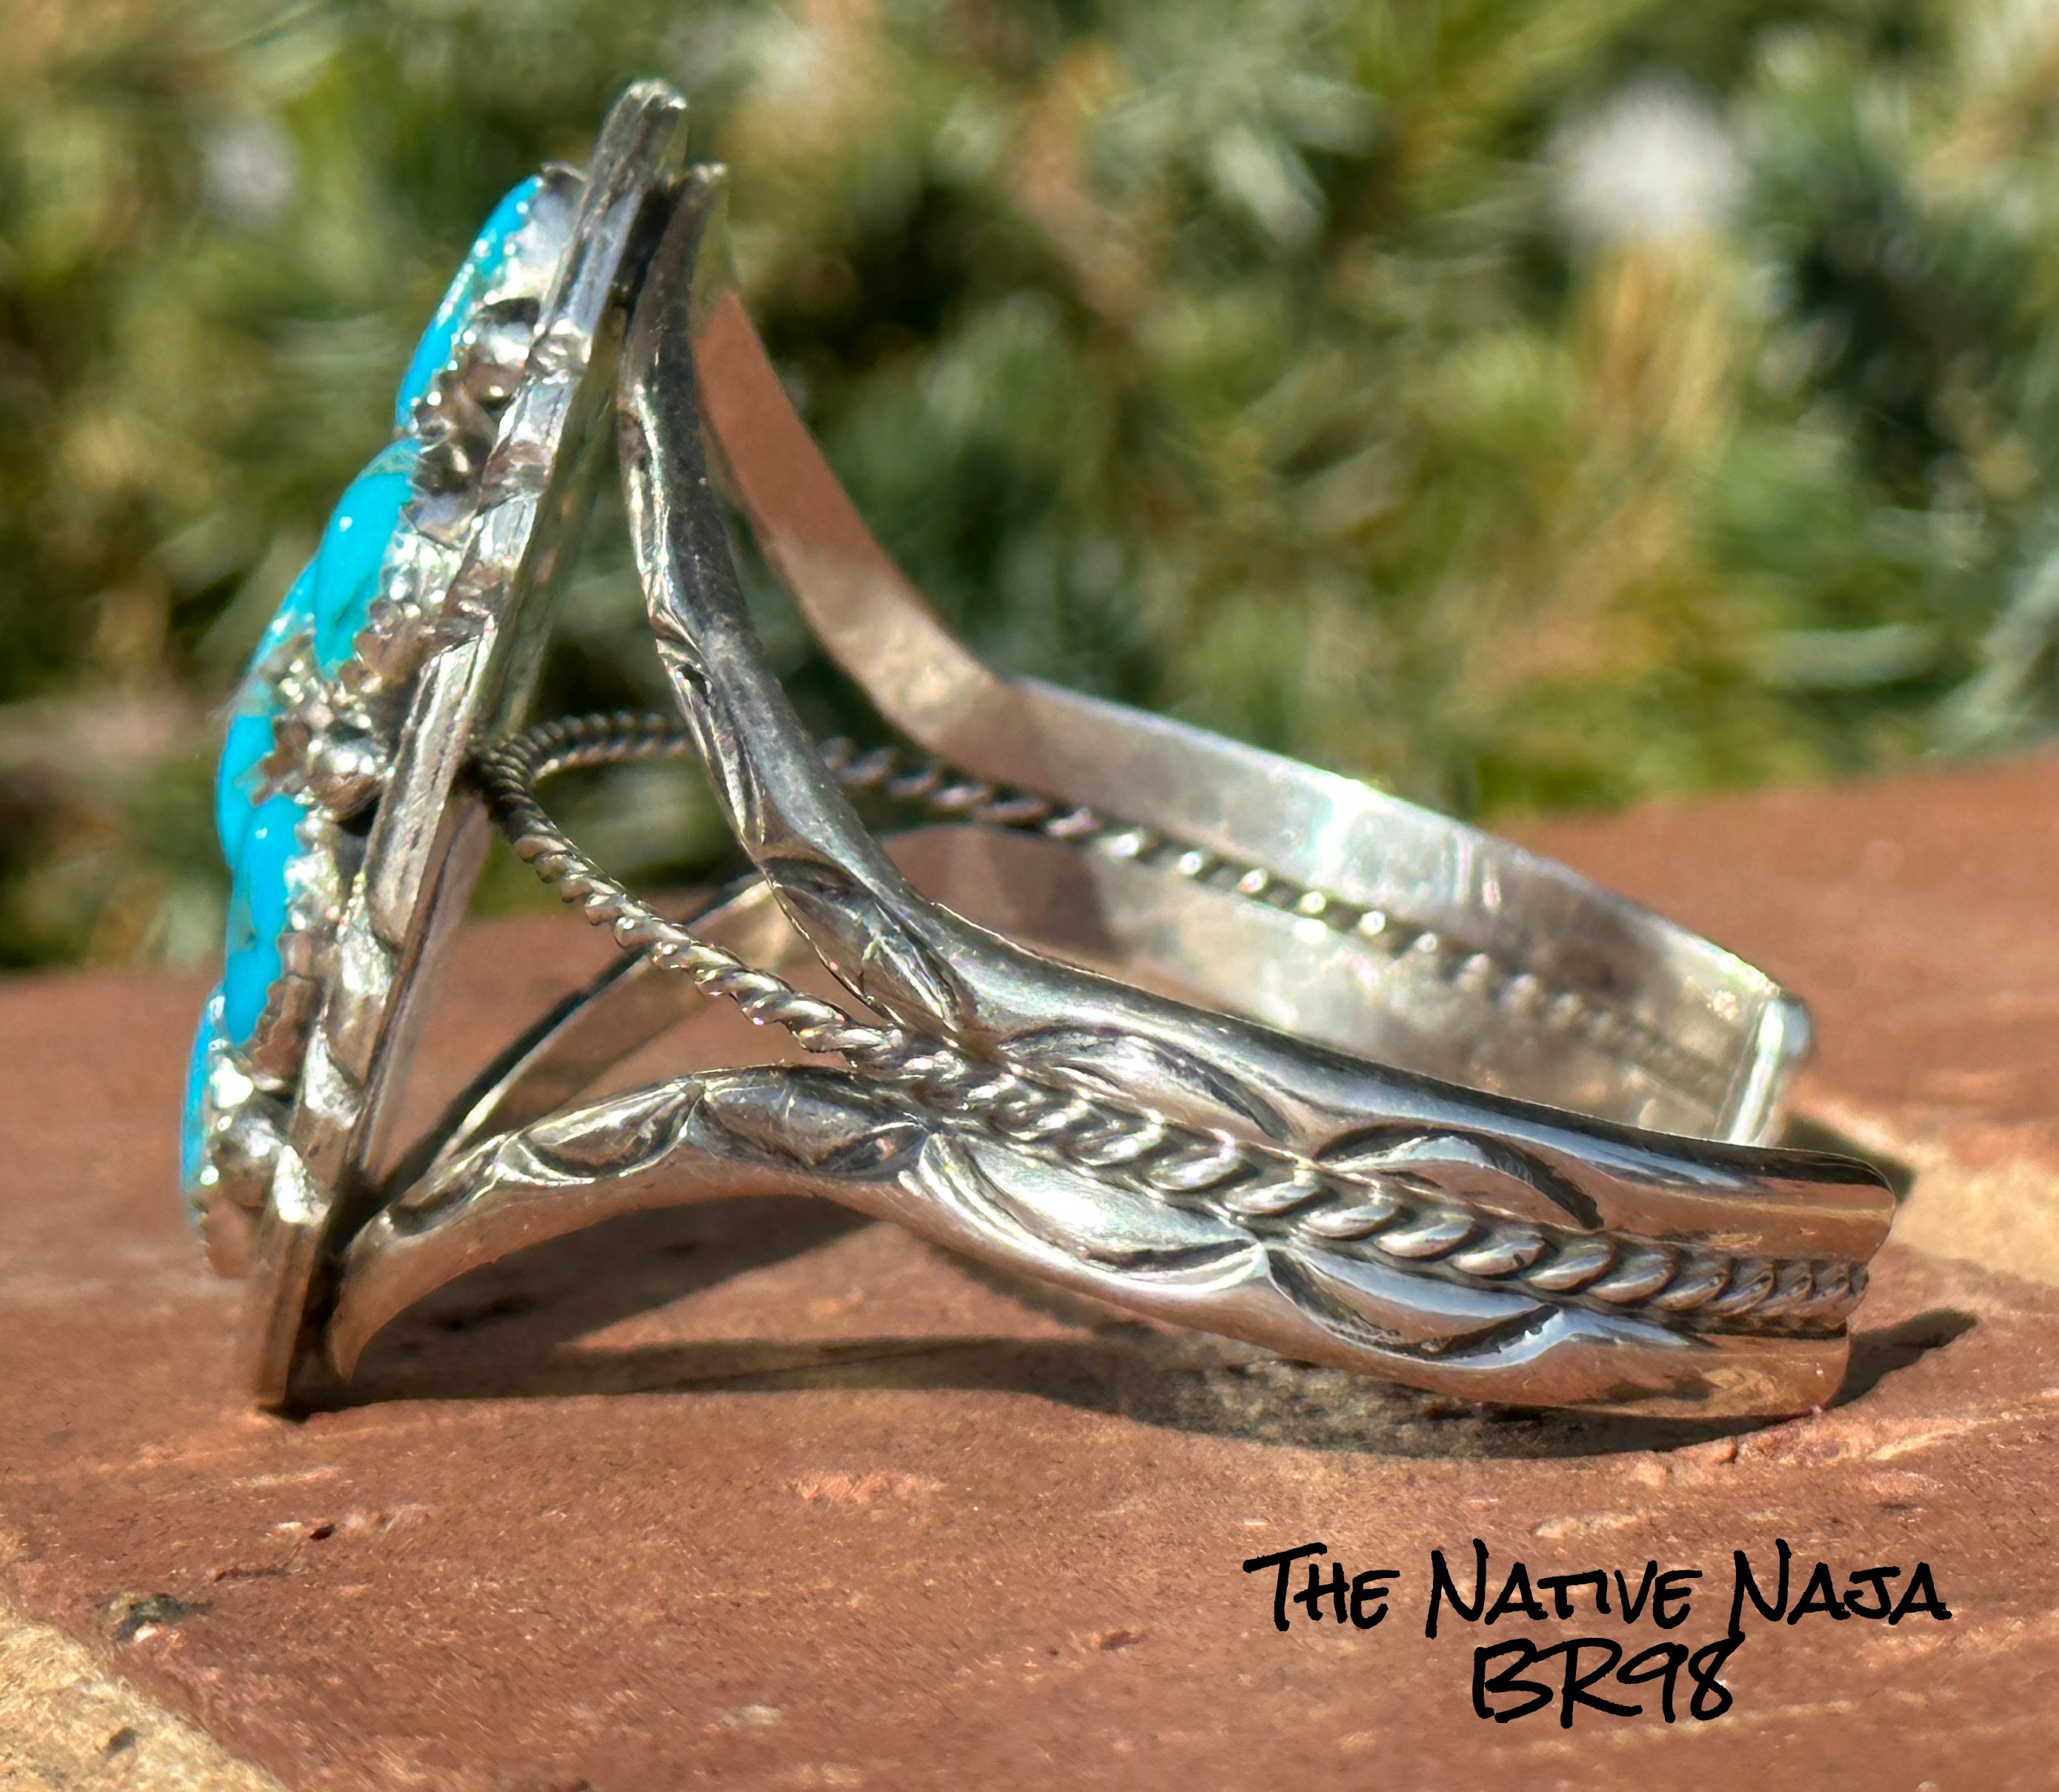 Navajo Melvin Chee Sterling Silver & Kingman Turquoise Cluster Cuff Bracelet BR98